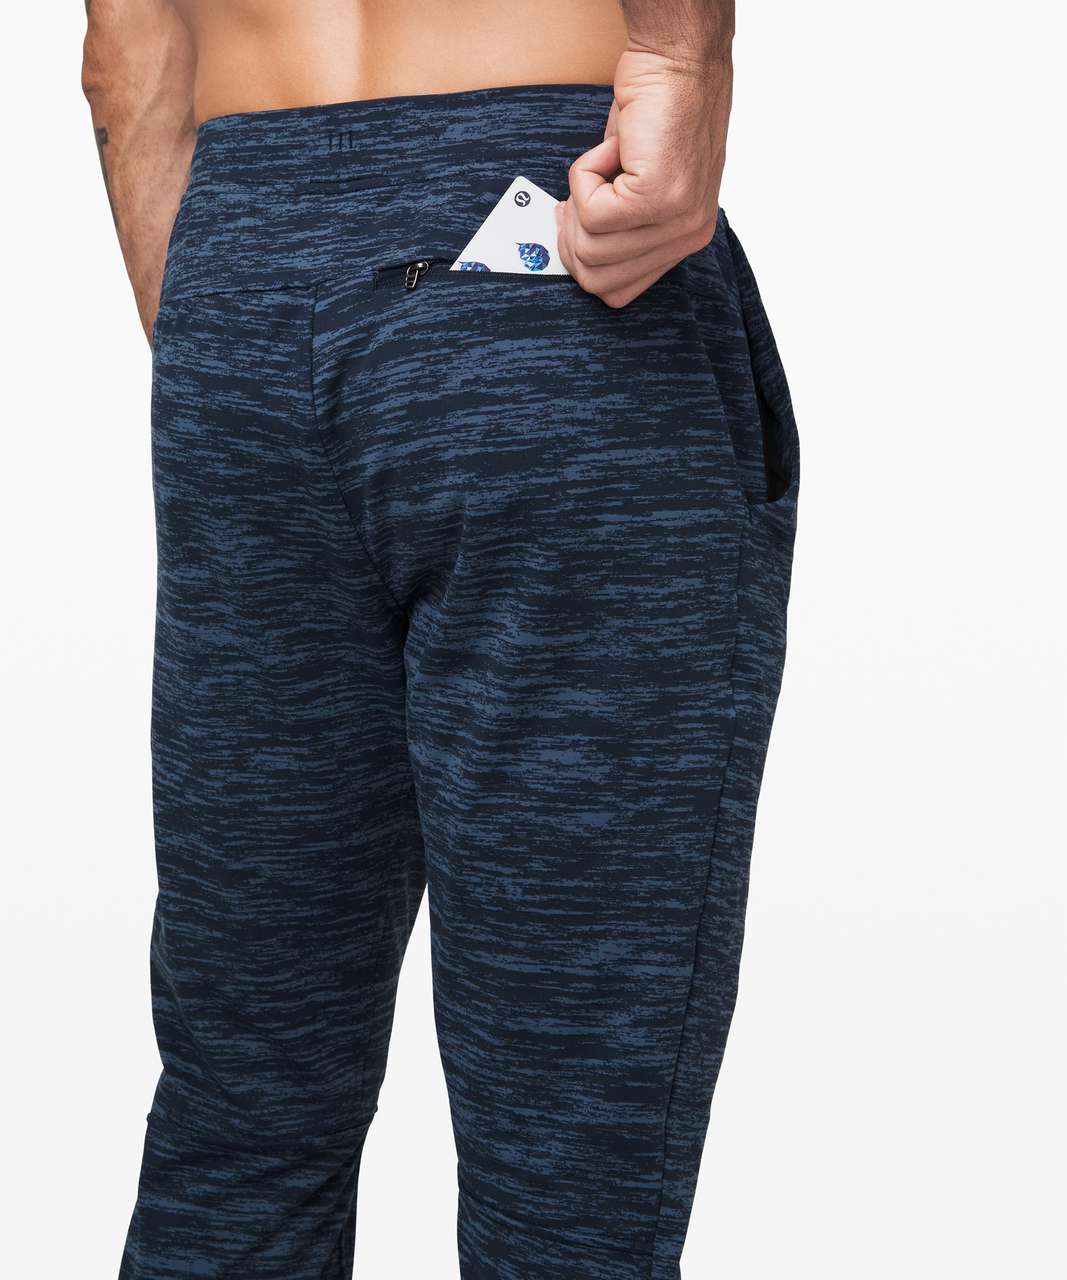 Lululemon ABC Jogger Pant Navy Men New with Tags $128.00 32-34'' Inseam